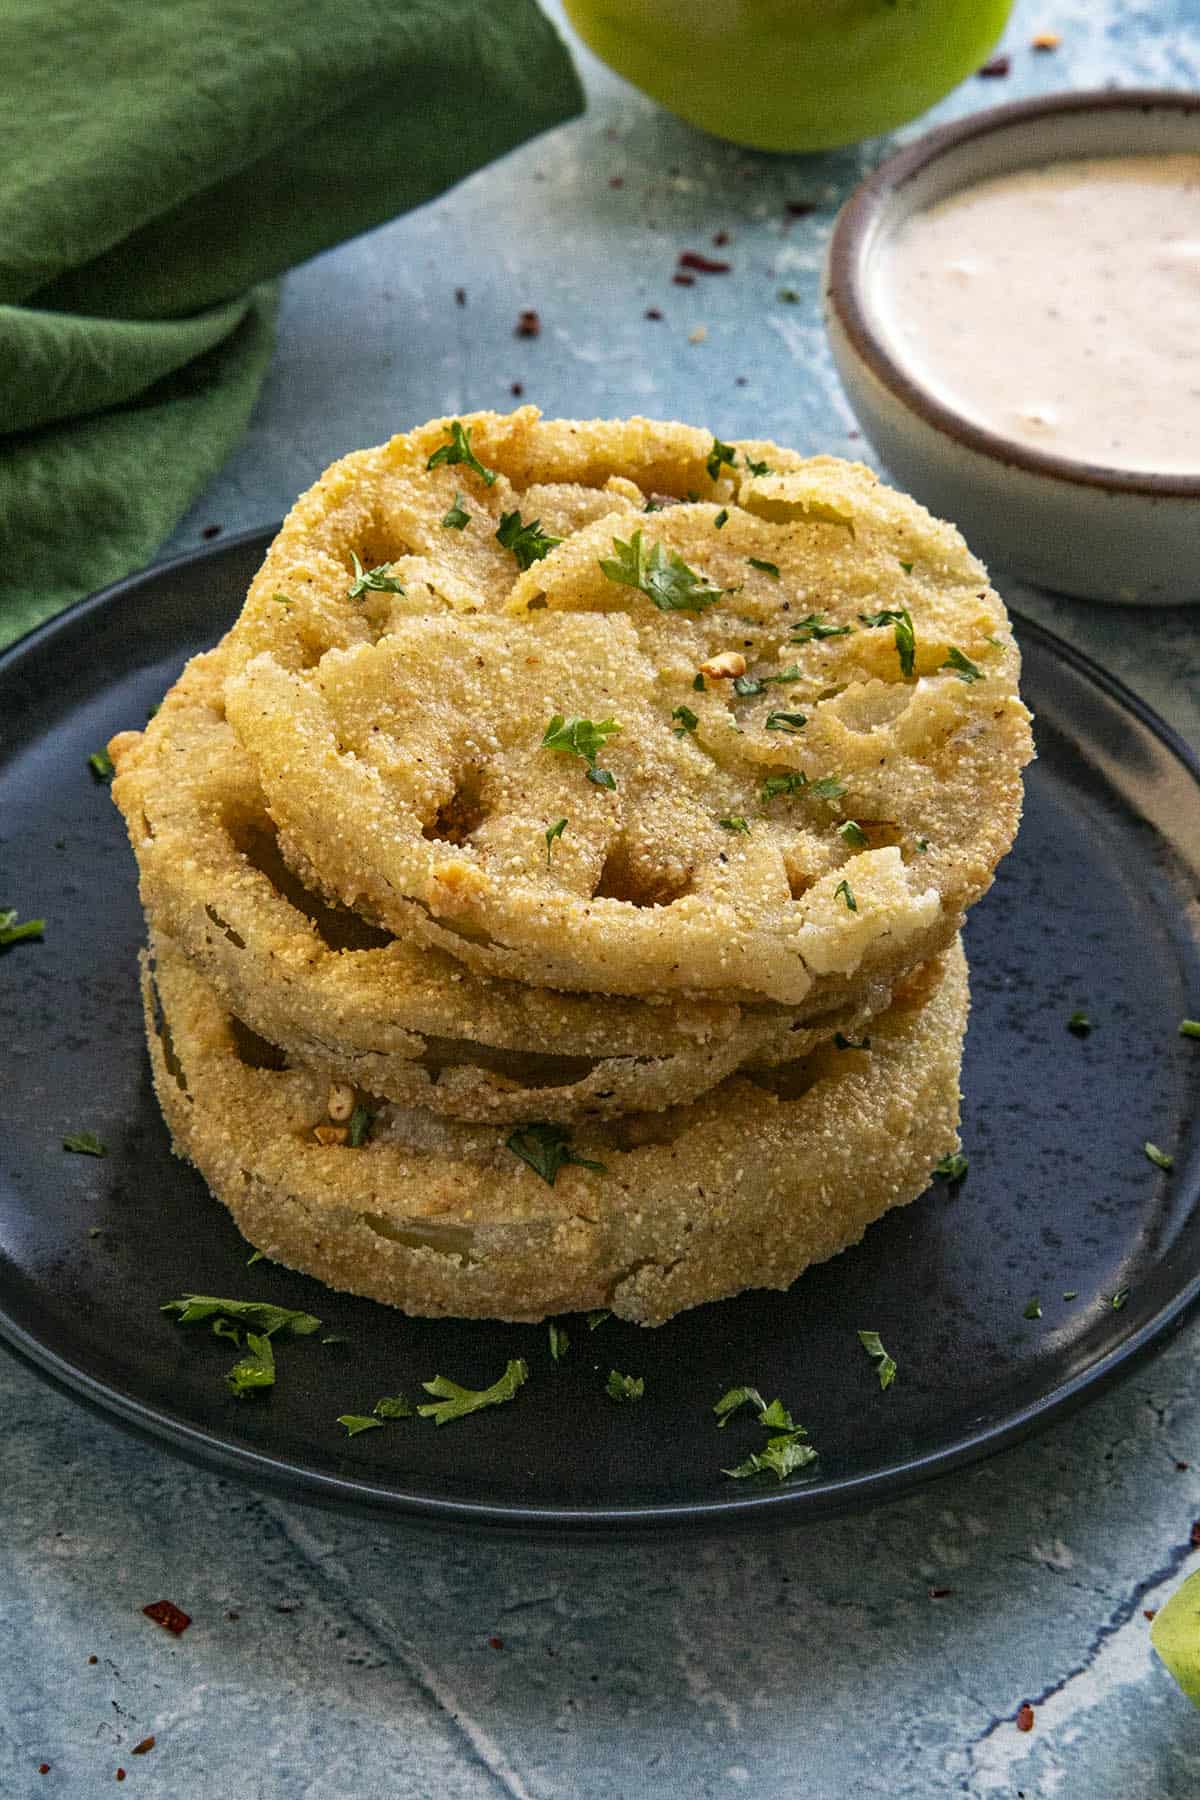 A plate of 3 Fried Green Tomatoes ready to serve, with remoulade